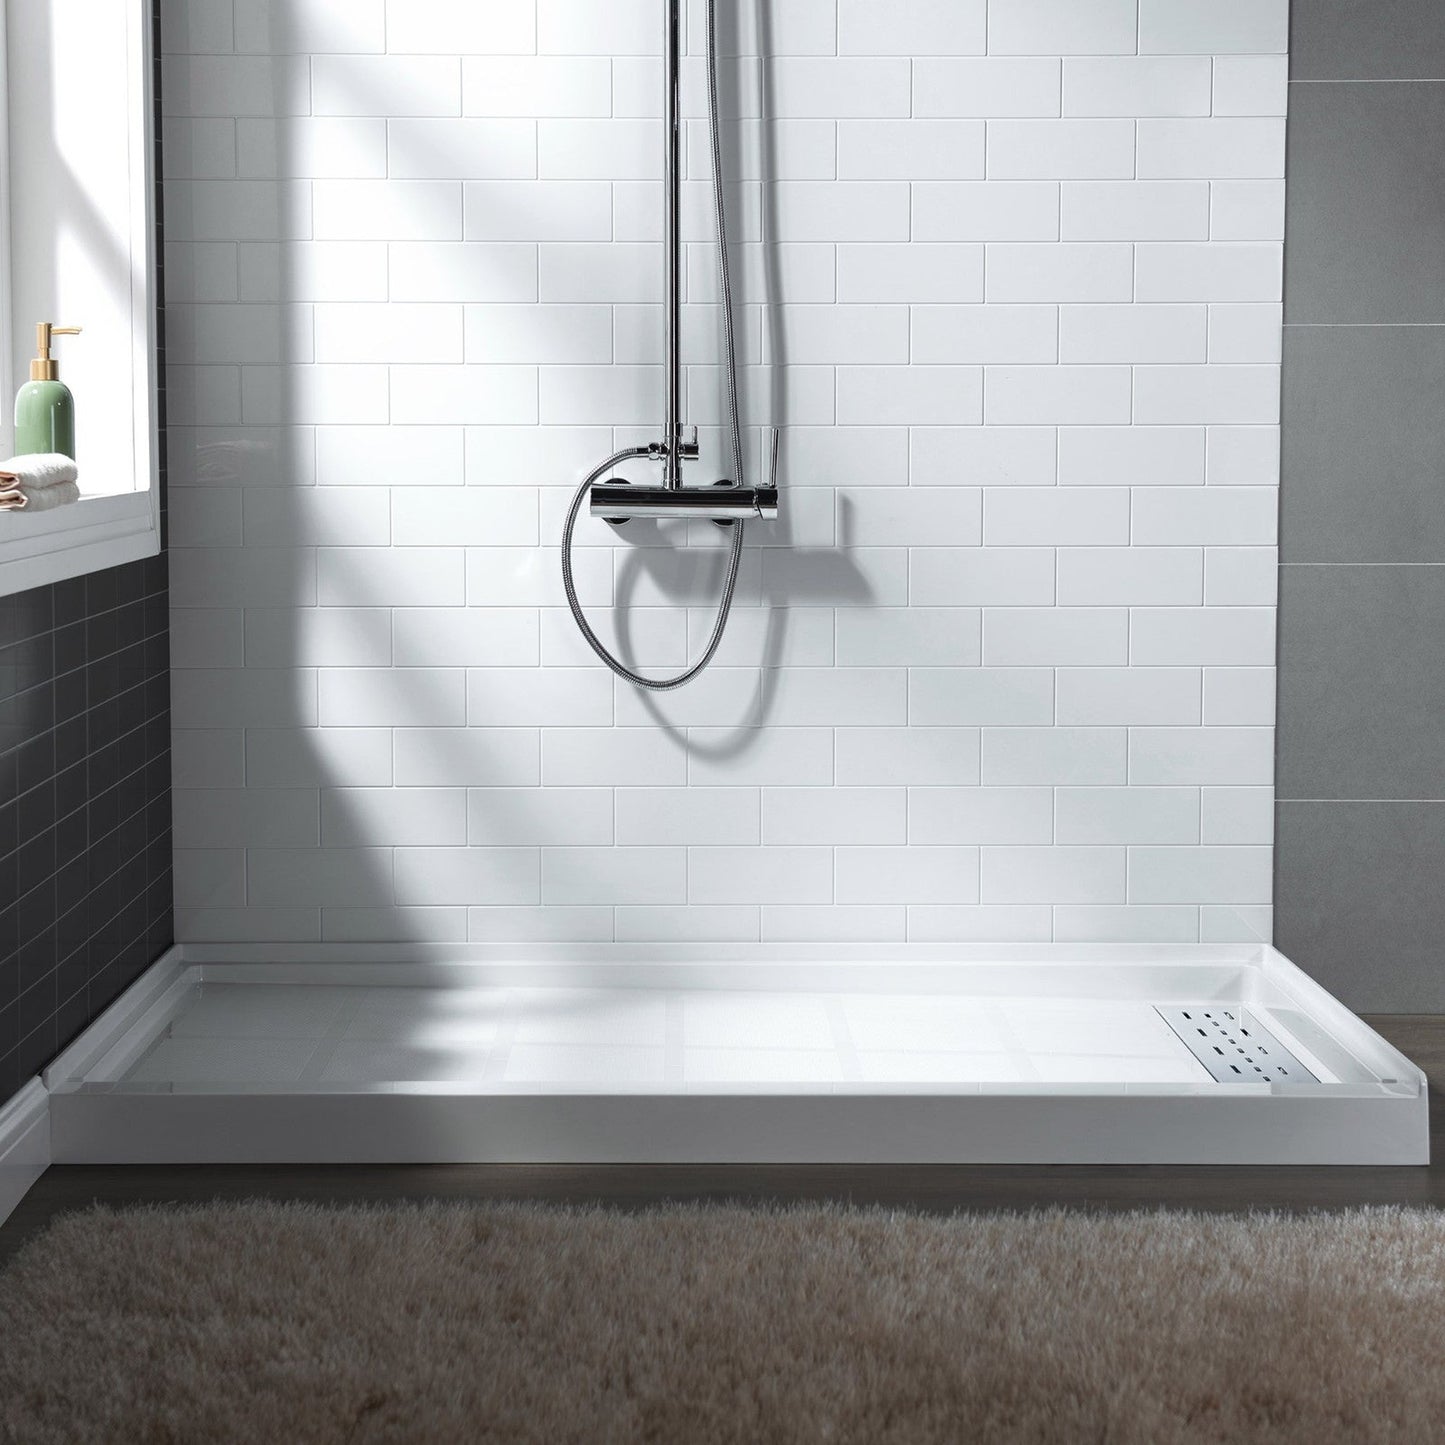 WoodBridge 48" x 36" White Solid Surface Shower Base Right Drain Location With Chrome Trench Drain Cover